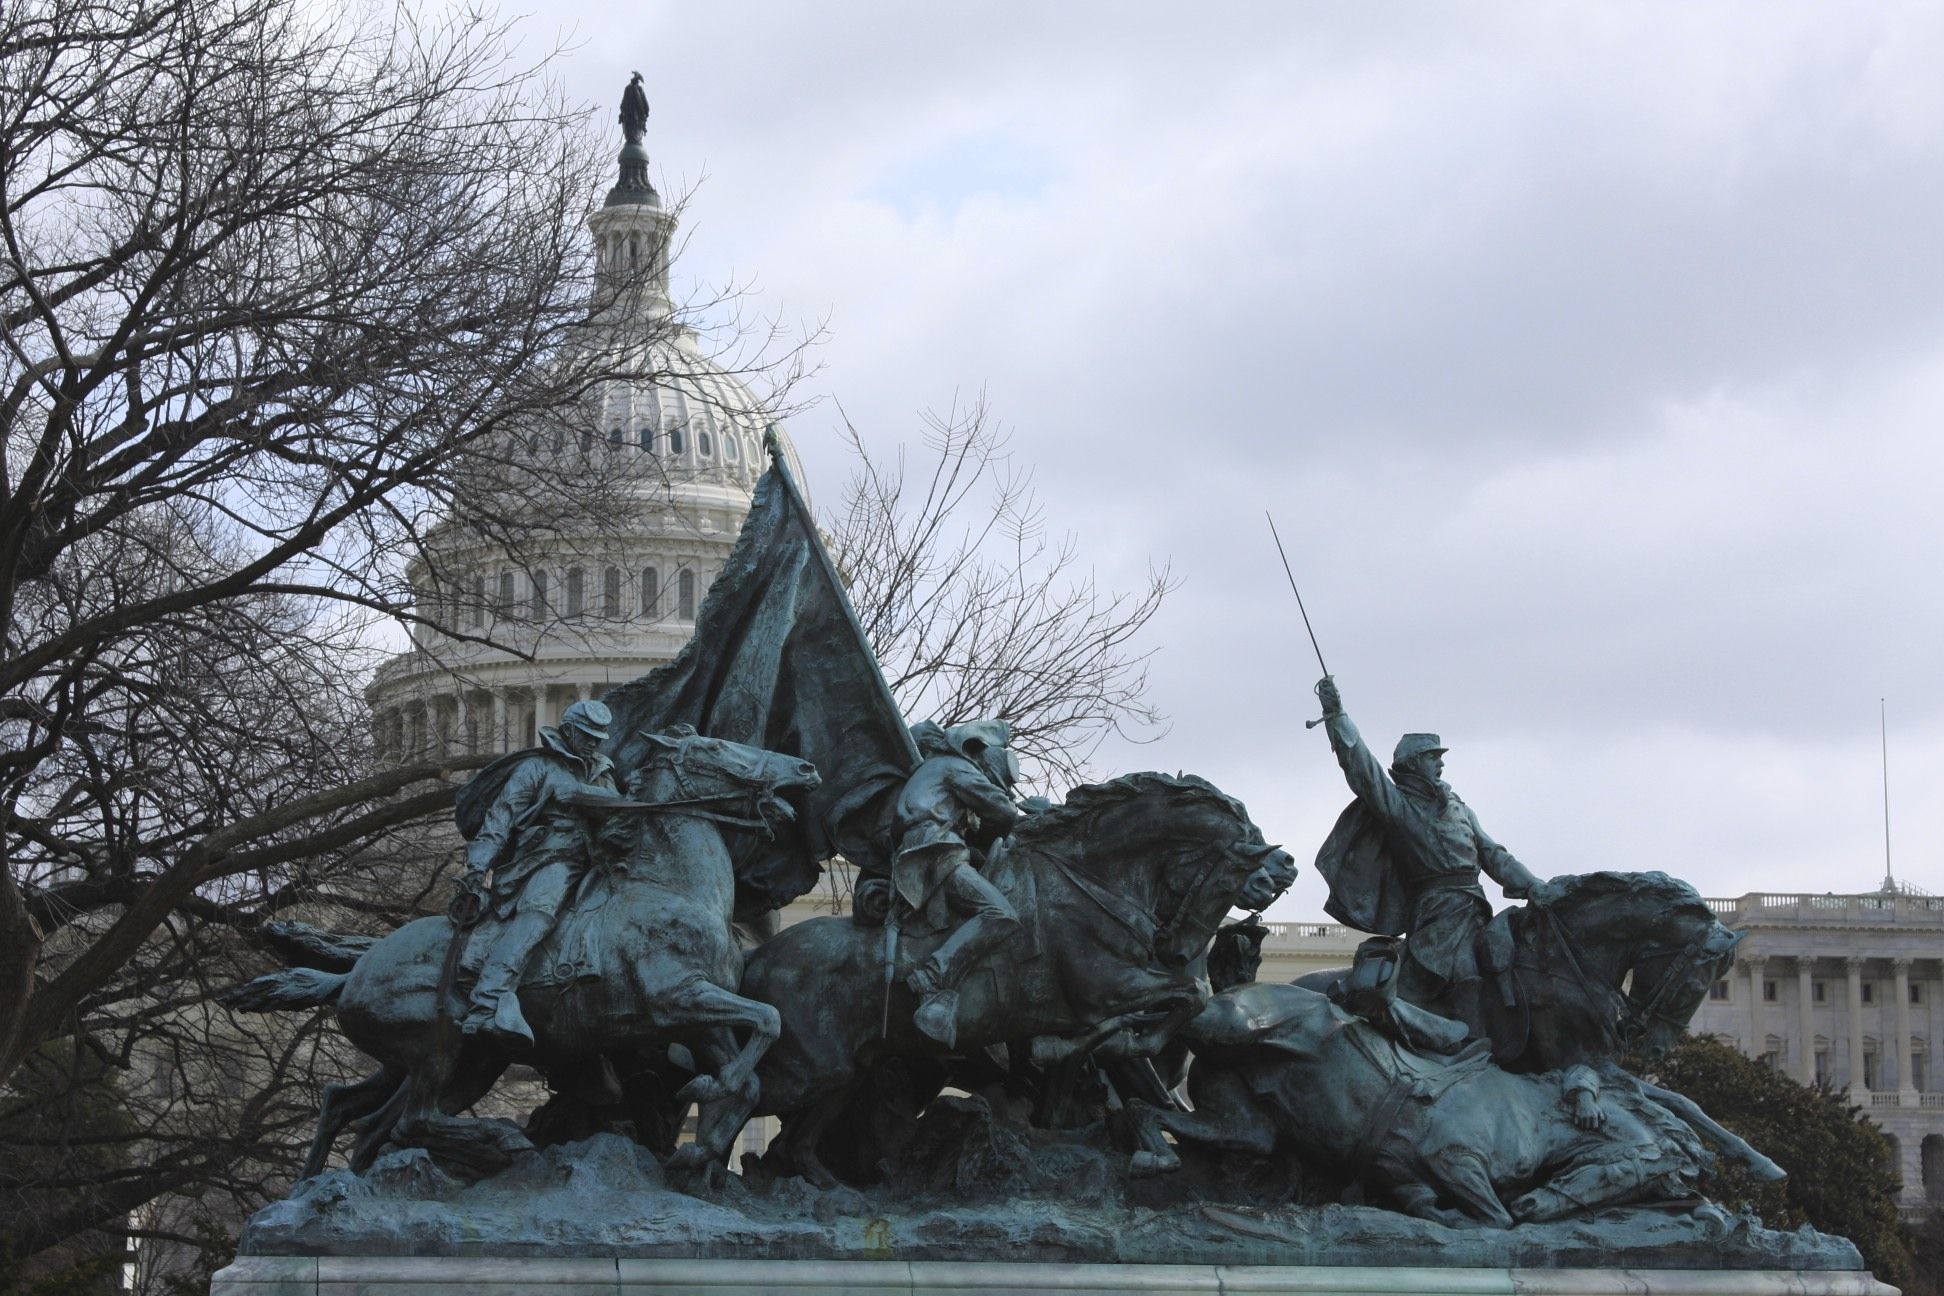 The cavalry charge at the Grant monument on the Washington Mall ...